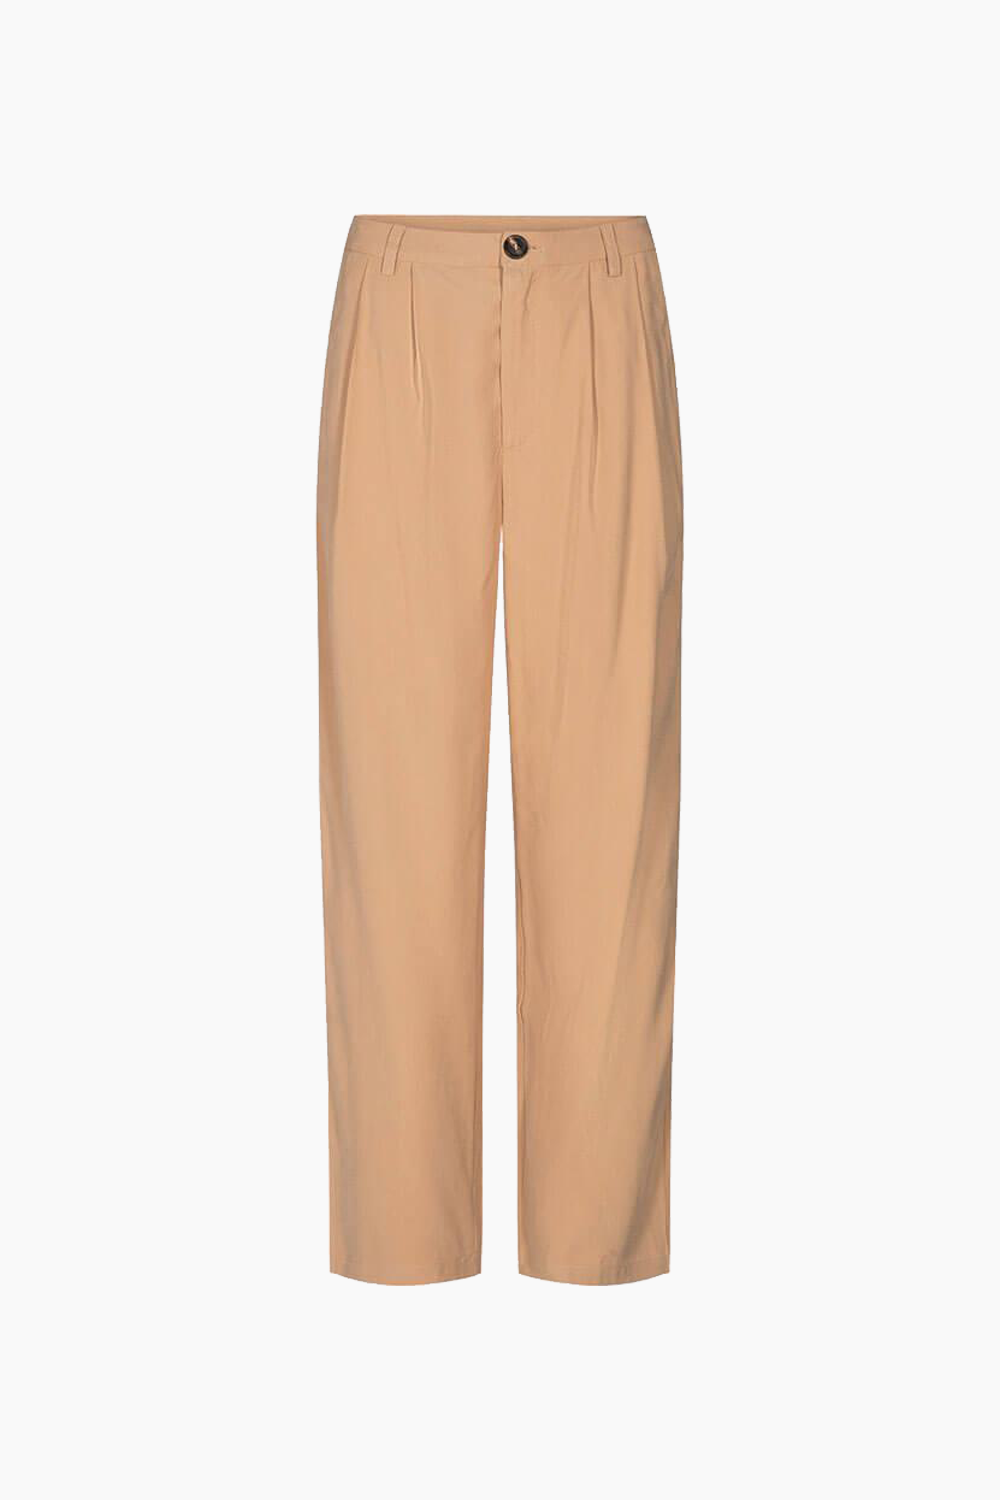 Nimma Trousers - Camel - Moves